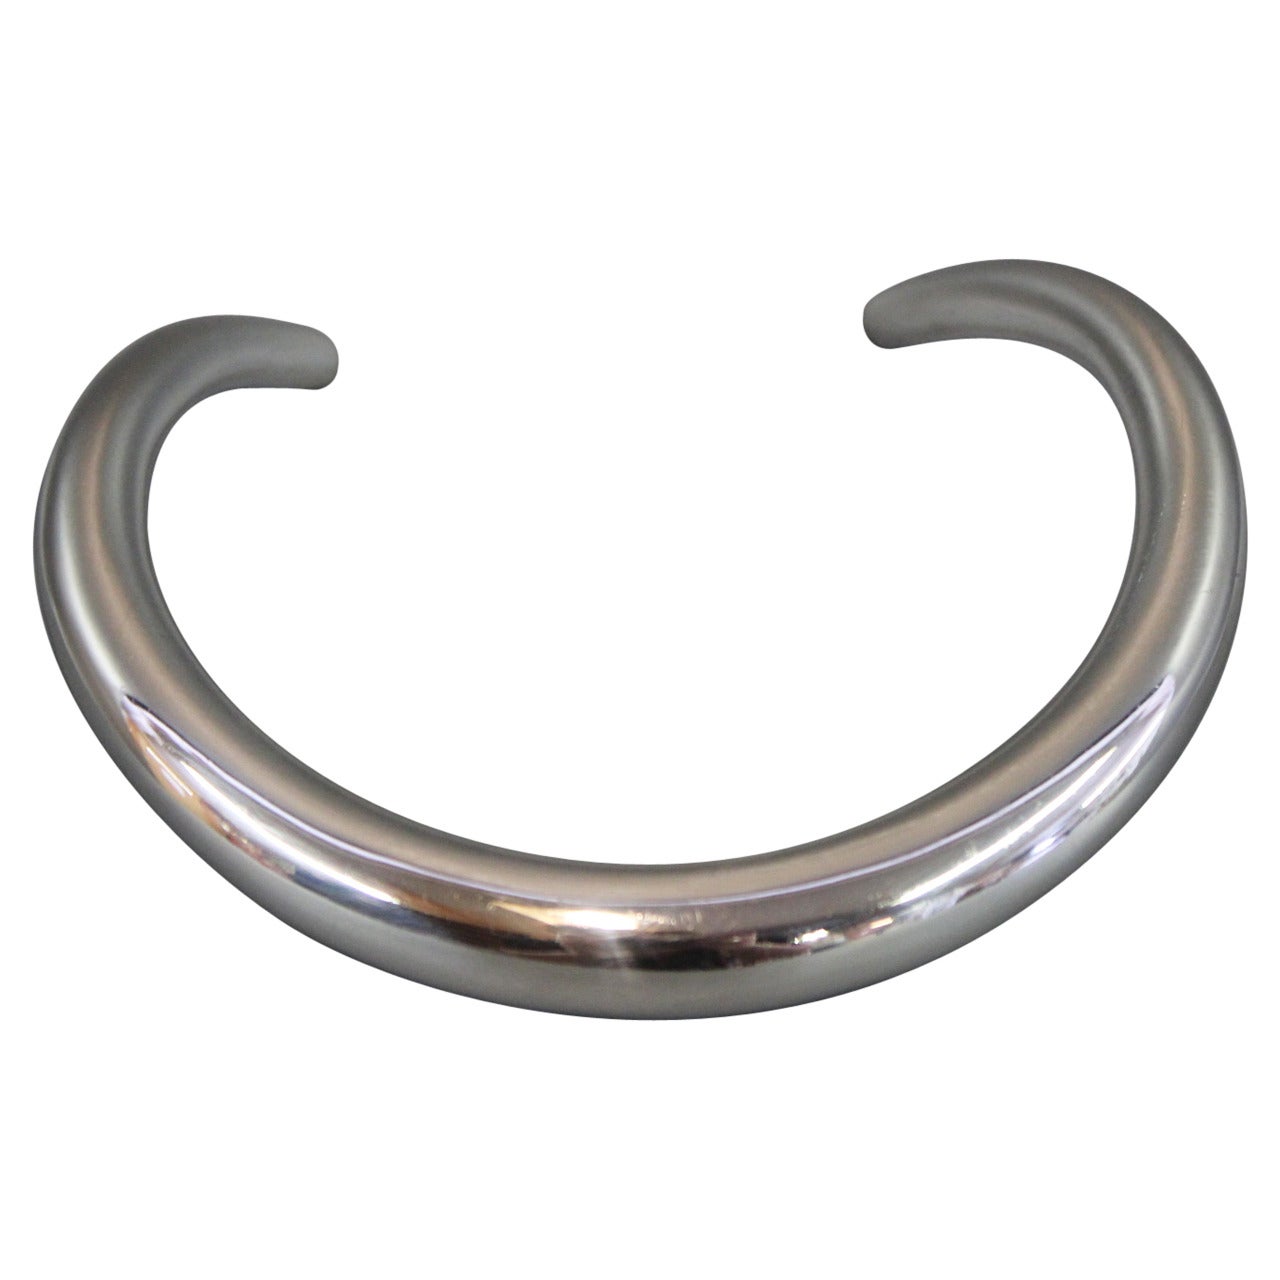 Neckring, 29A by Anne Ammitzbøll for Georg Jensen, 925 Sterling Silver, 1945